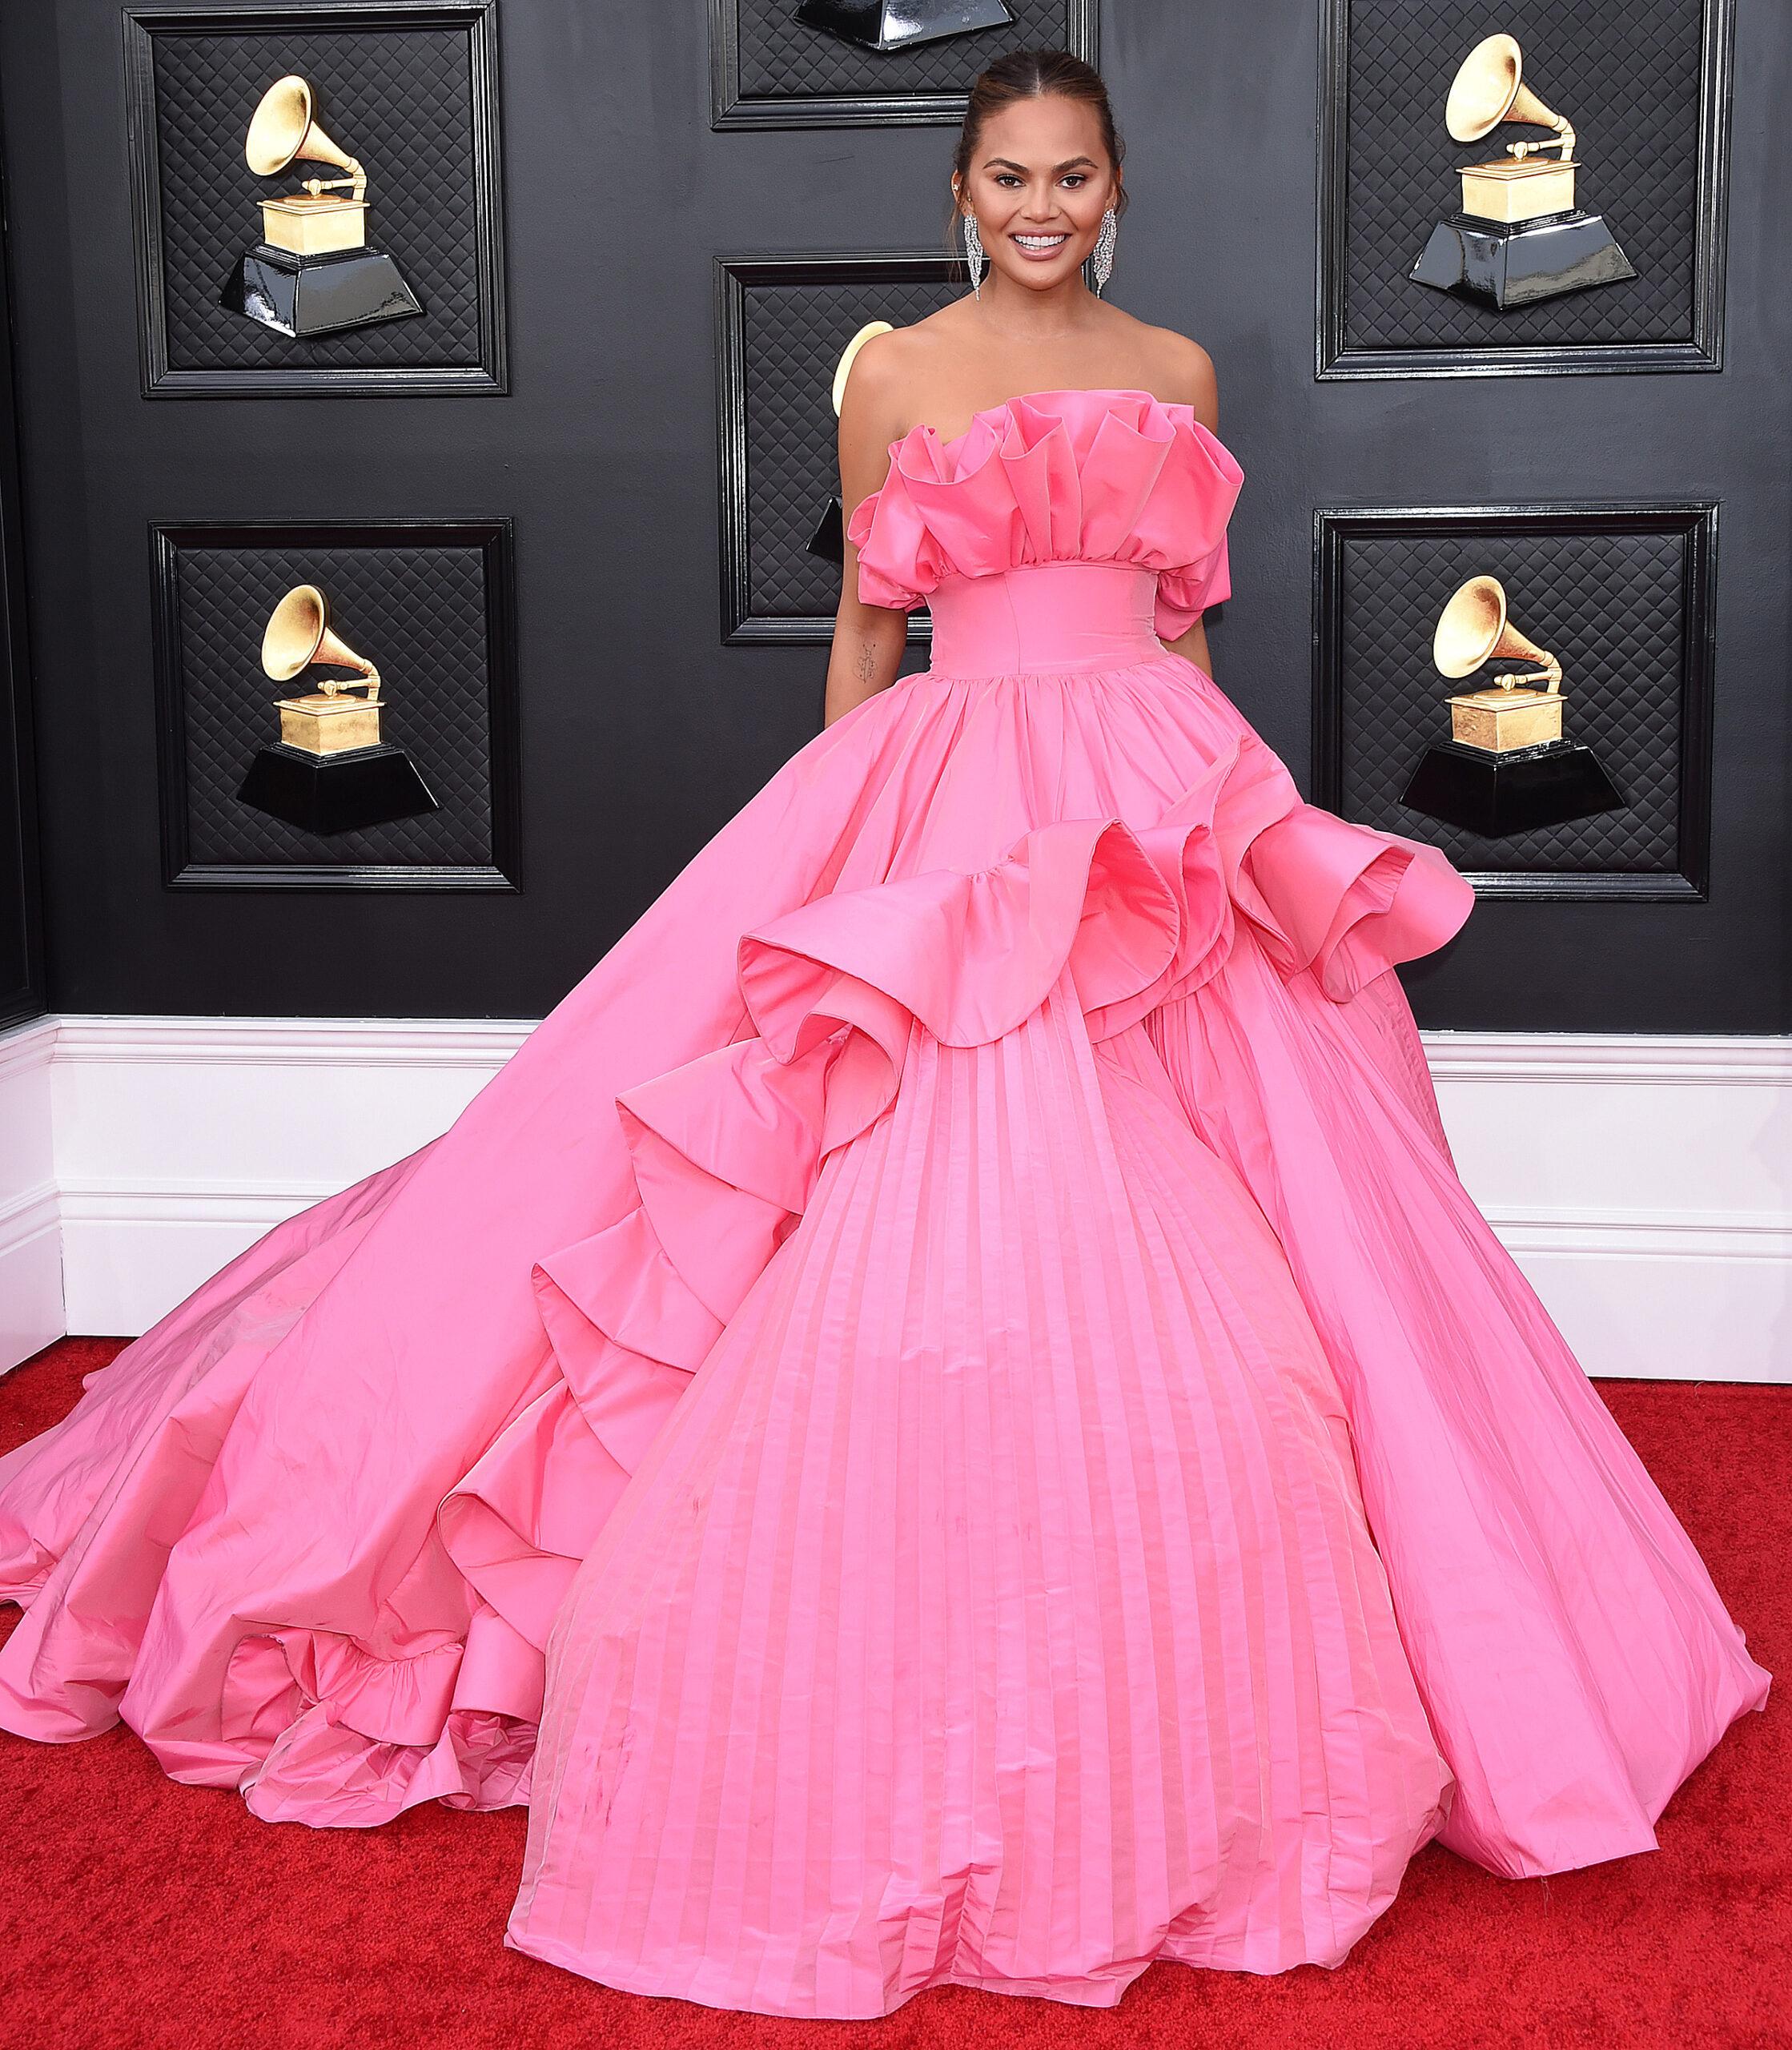 Chrissy Teigen at The 64th Annual GRAMMY Awards